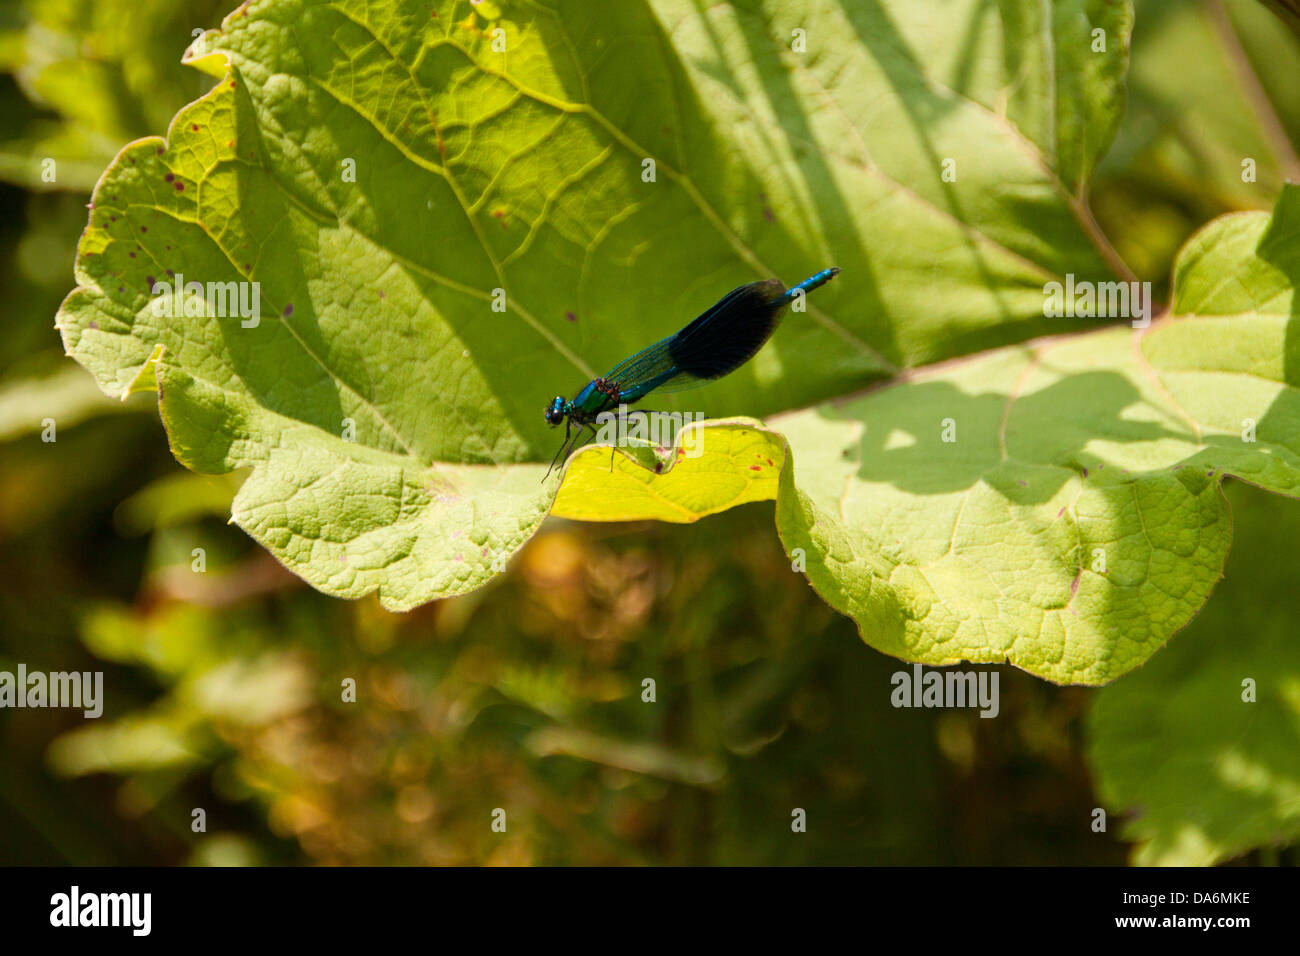 Male Banded Demoiselle Fly - Calopteryx splendens - Family Calopterygidae part of the Suborder Zygoptera... Stock Photo